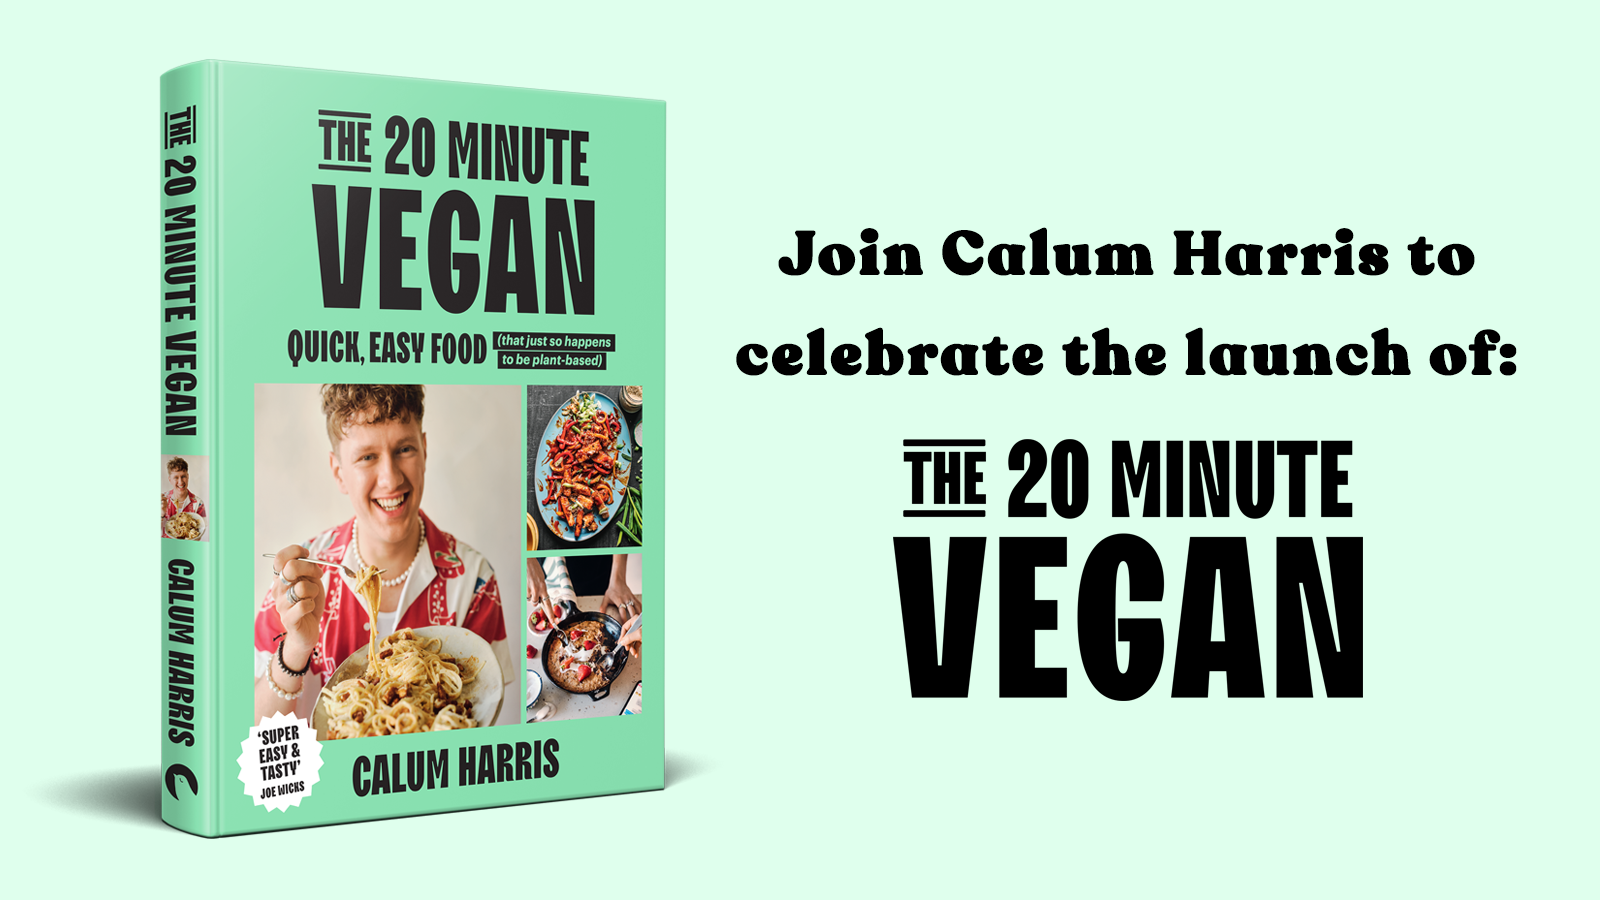 Join Calum Harris to celebrate the launch of The 20 Minute Vegan